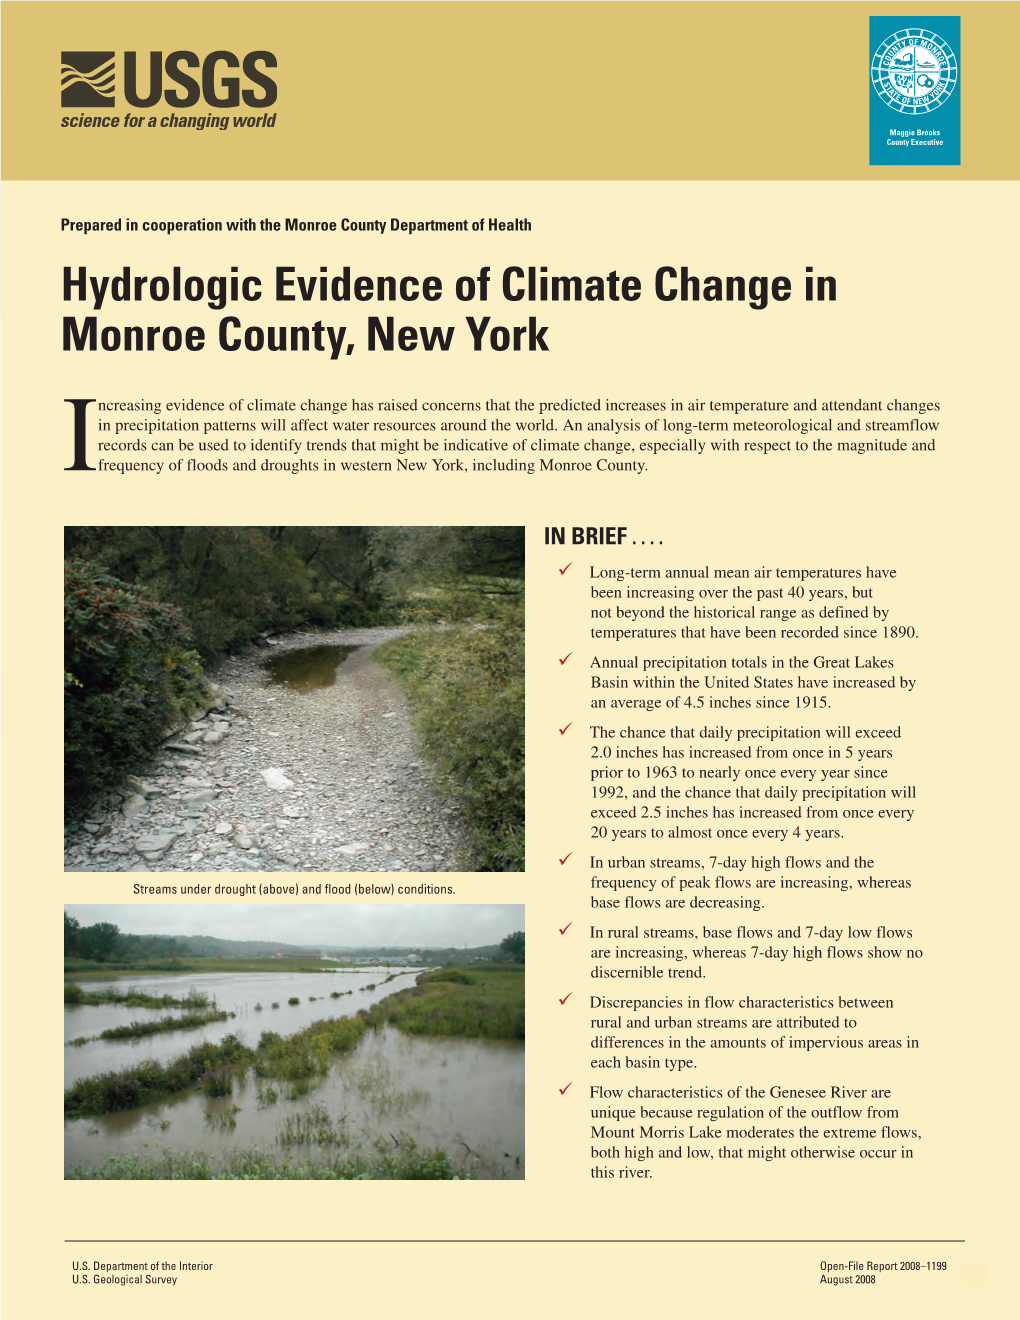 Hydrologic Evidence of Climate Change in Monroe County, New York